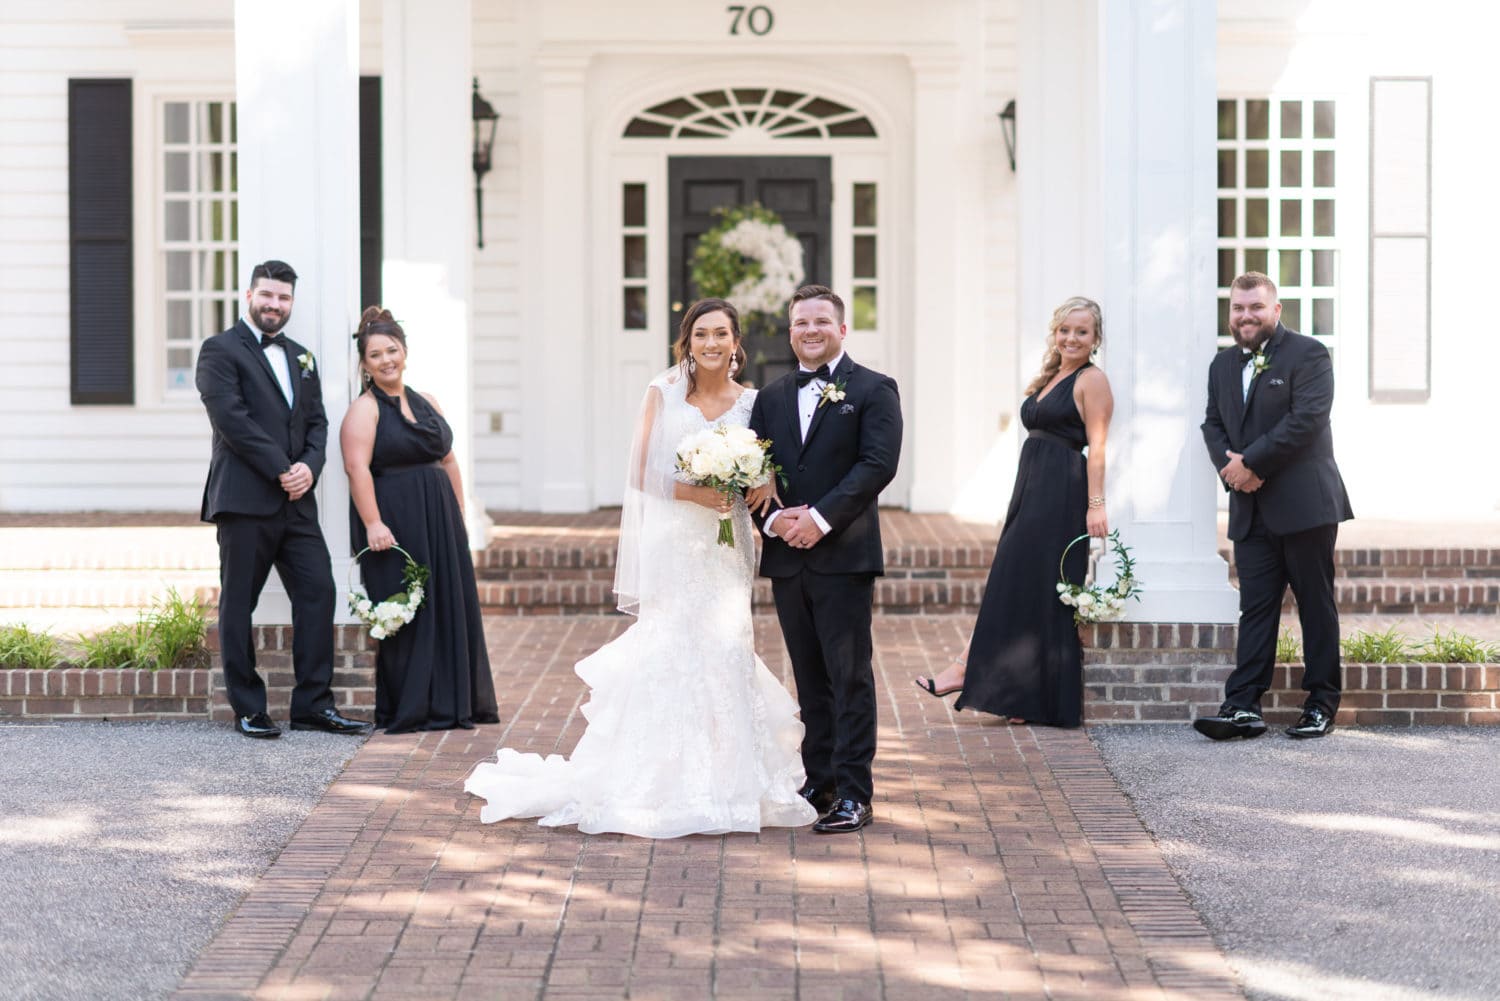 Pose with the wedding party in front of the clubhouse Pawleys Plantation